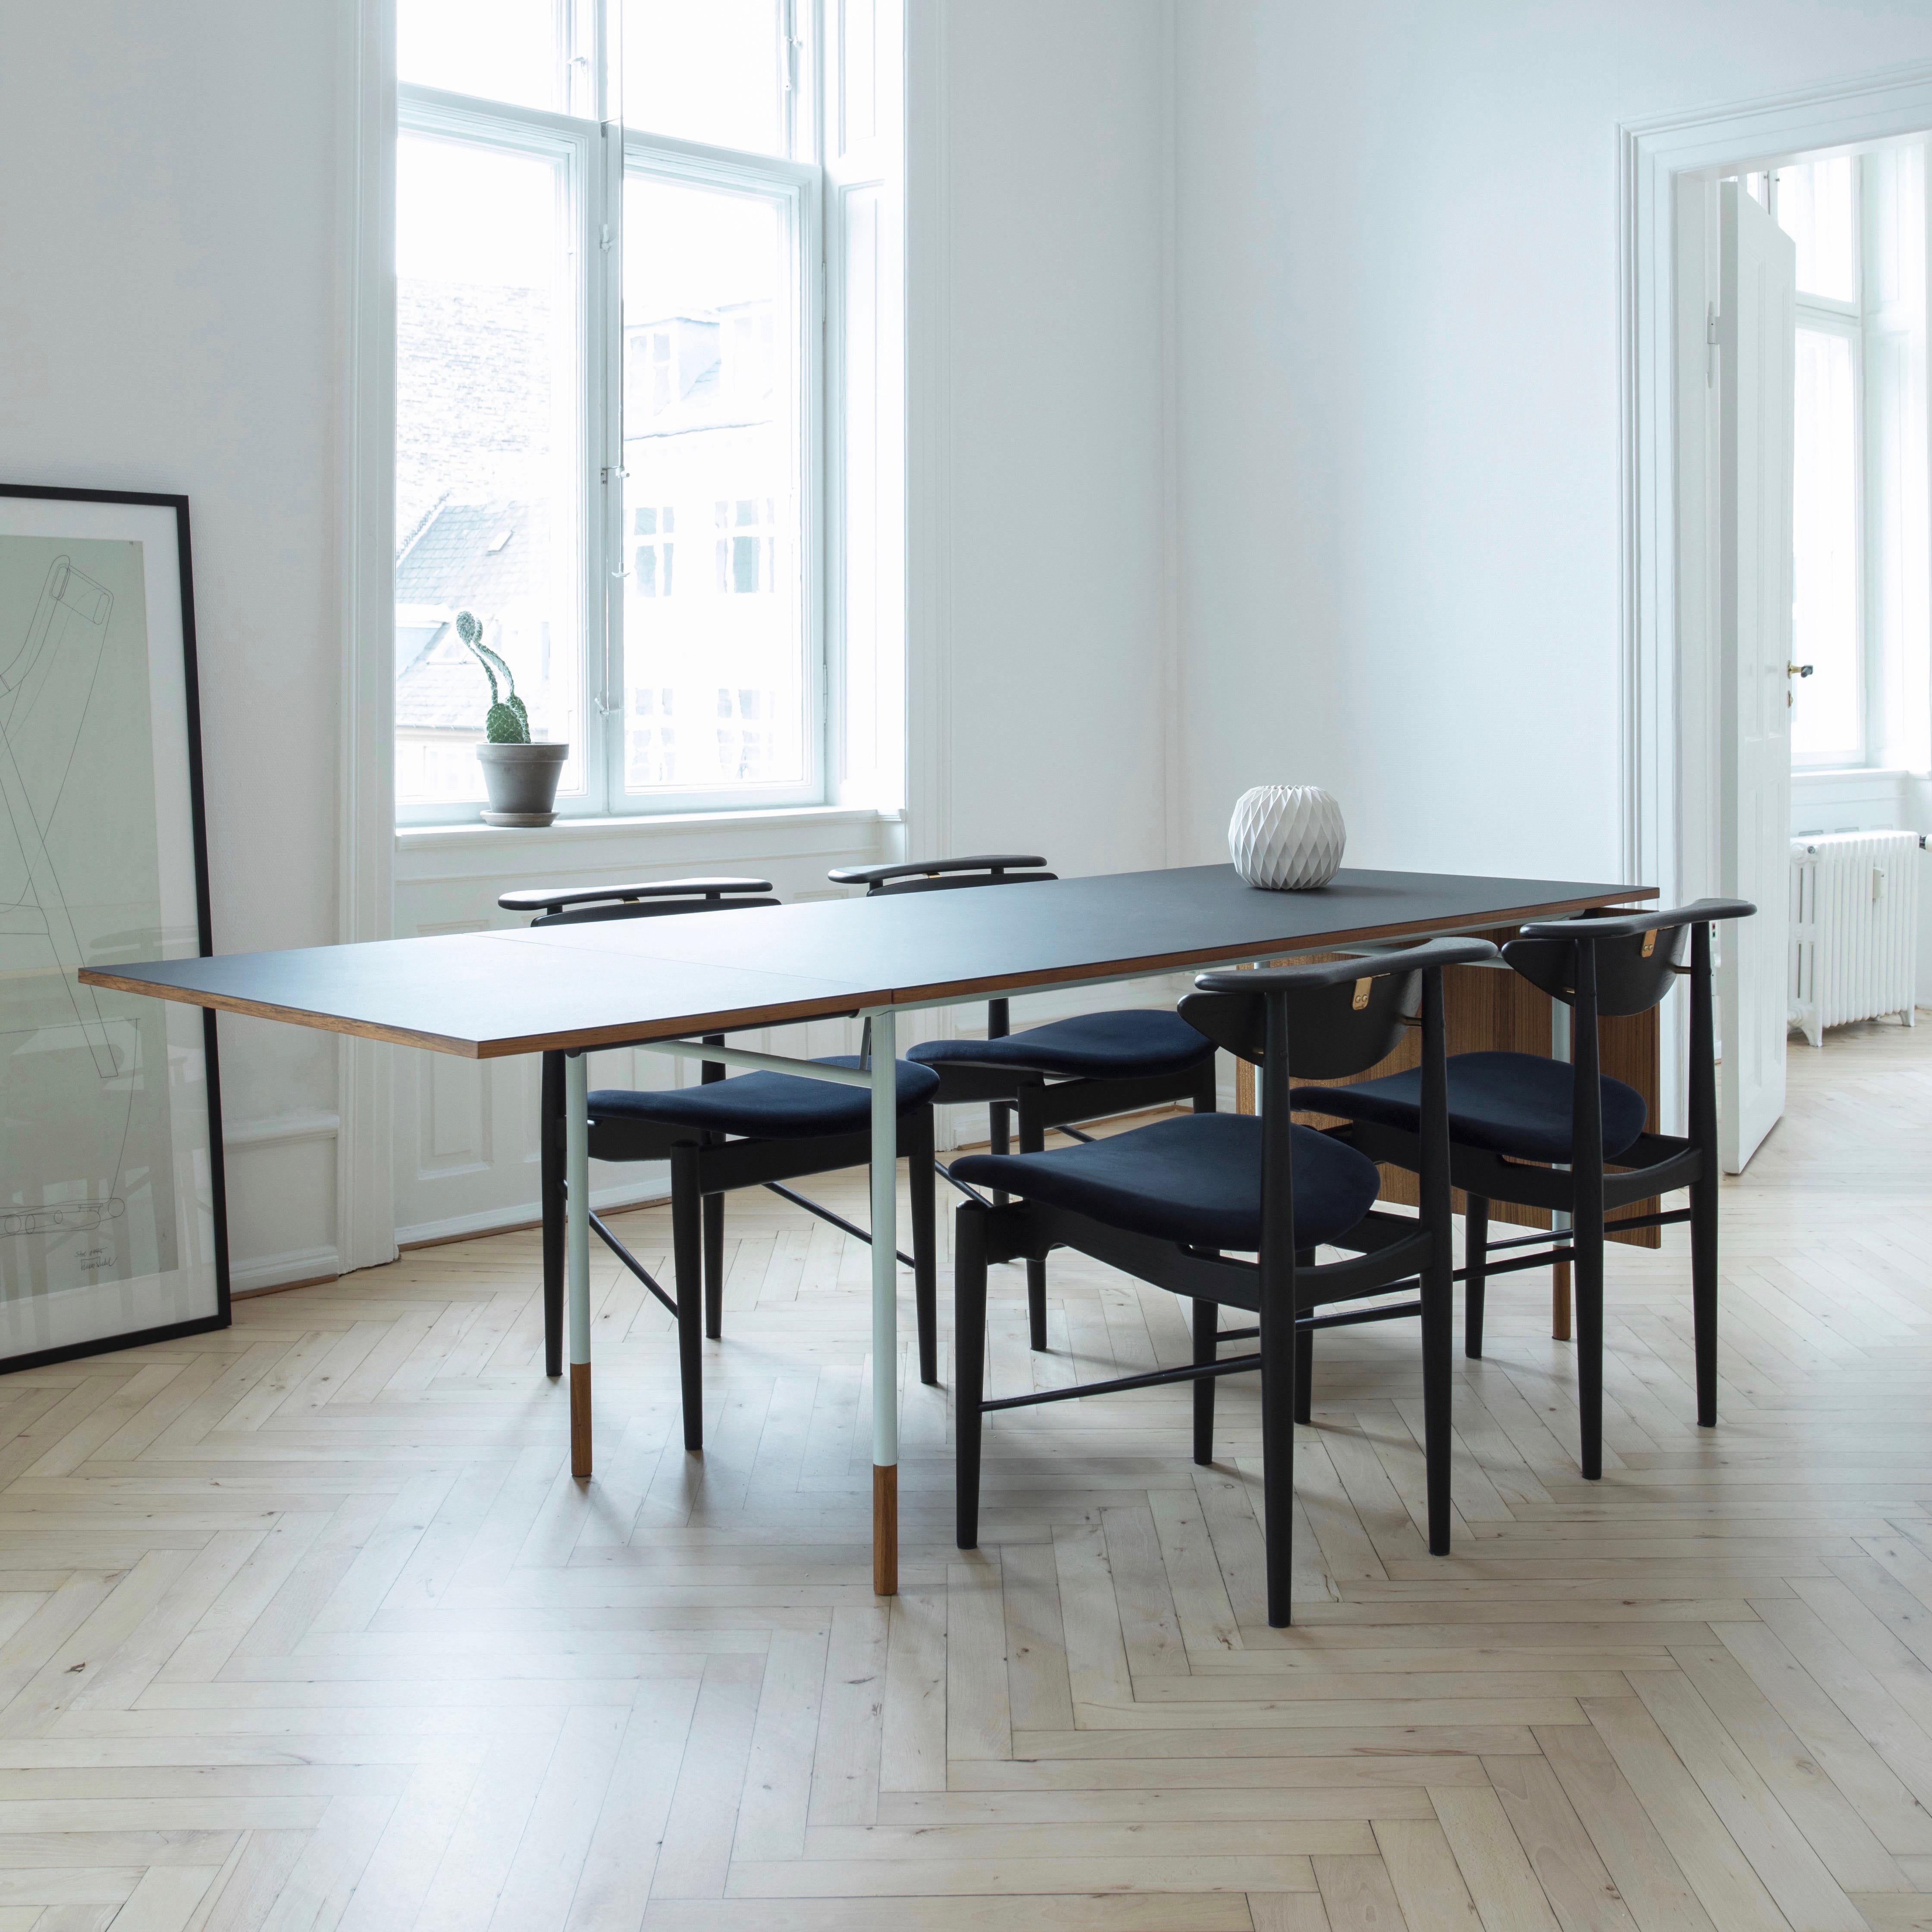 Finn Juhl Nyhavn Dining Table with Two Drop Leaves, Lino and Wood 5